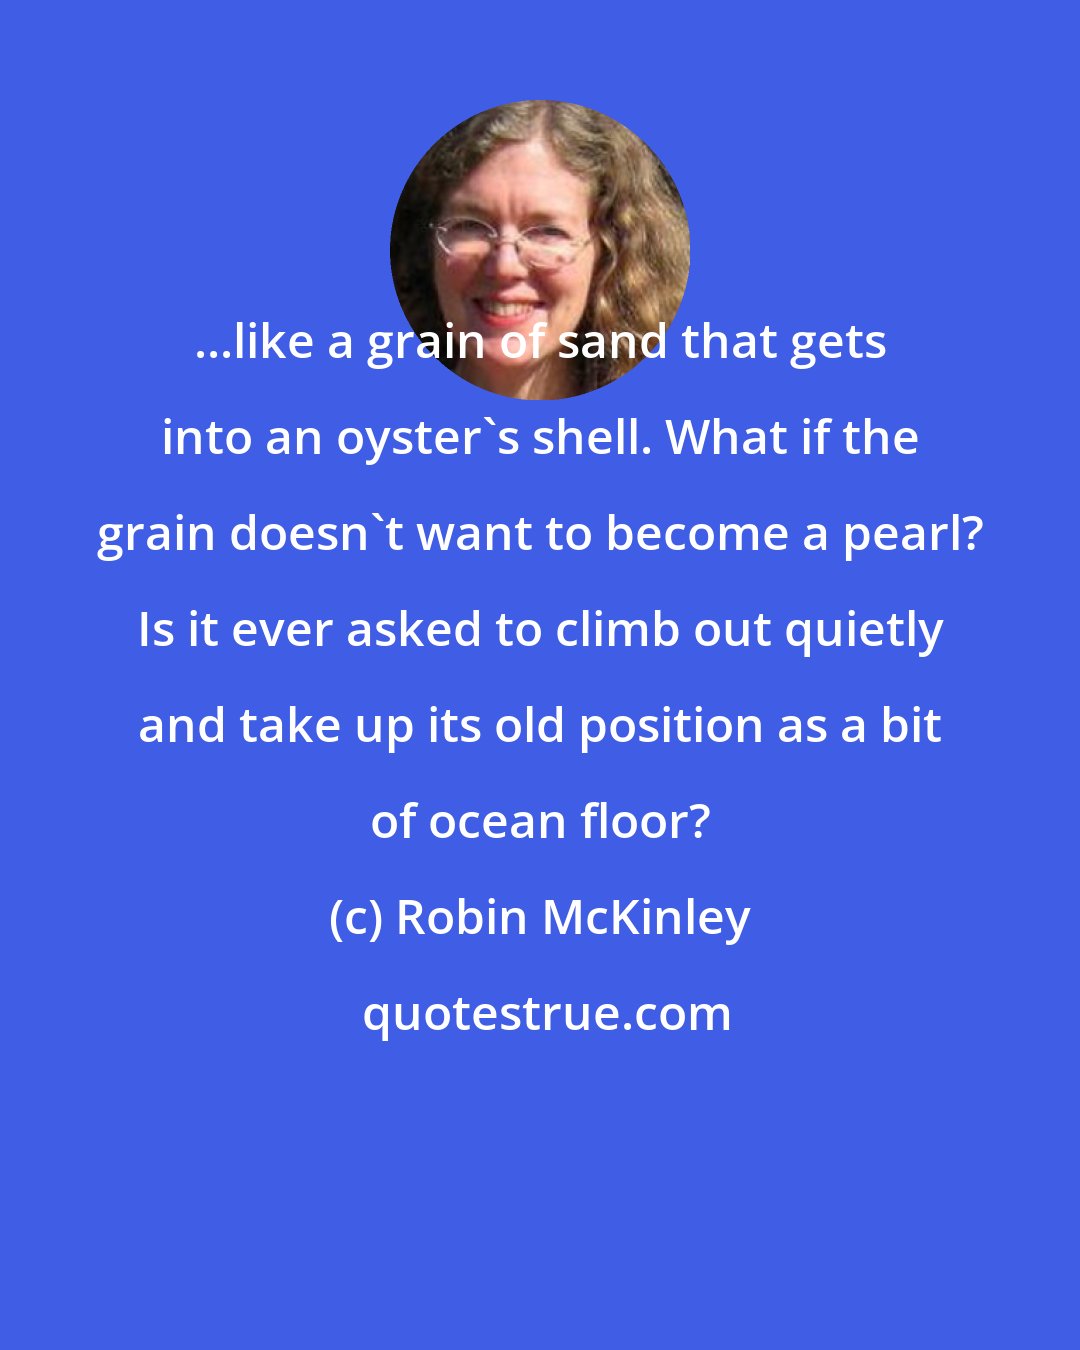 Robin McKinley: ...like a grain of sand that gets into an oyster's shell. What if the grain doesn't want to become a pearl? Is it ever asked to climb out quietly and take up its old position as a bit of ocean floor?